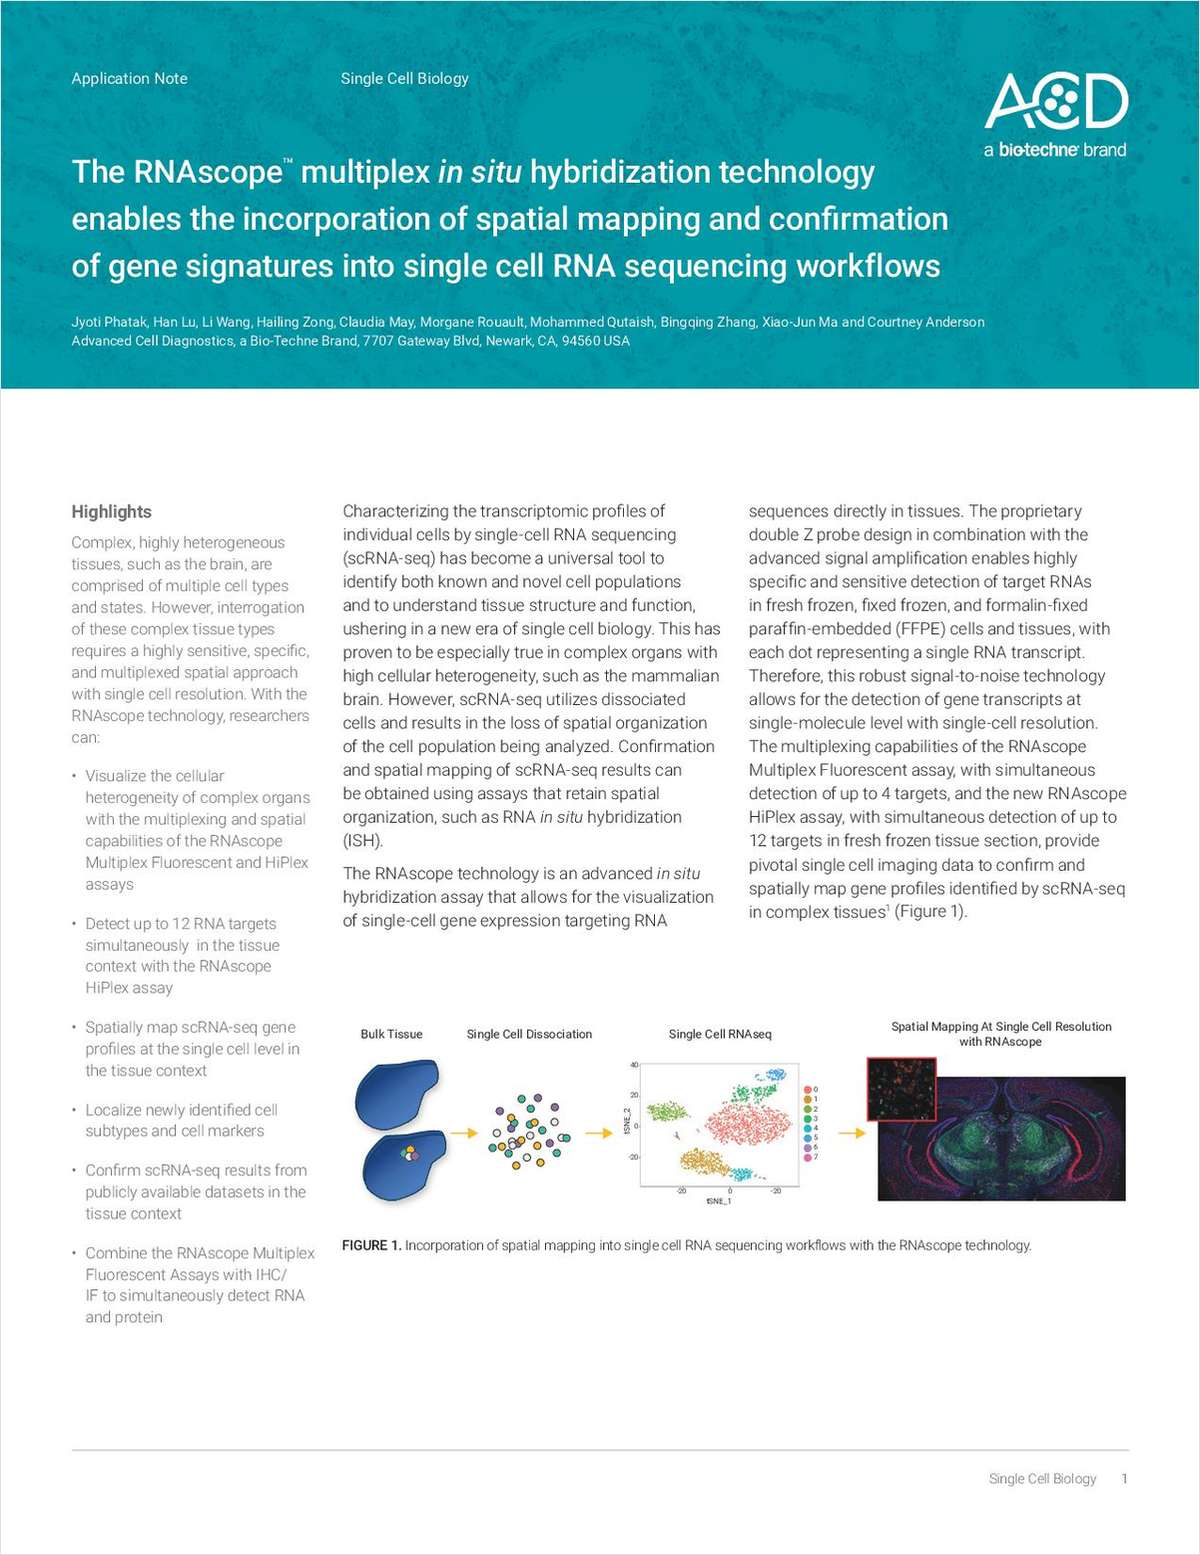 The RNAscope Multiplex In Situ Hybridization Technology Enables the Incorporation of Spatial Mapping and Confirmation of Gene Signatures into Single-Cell RNA Sequencing Workflows